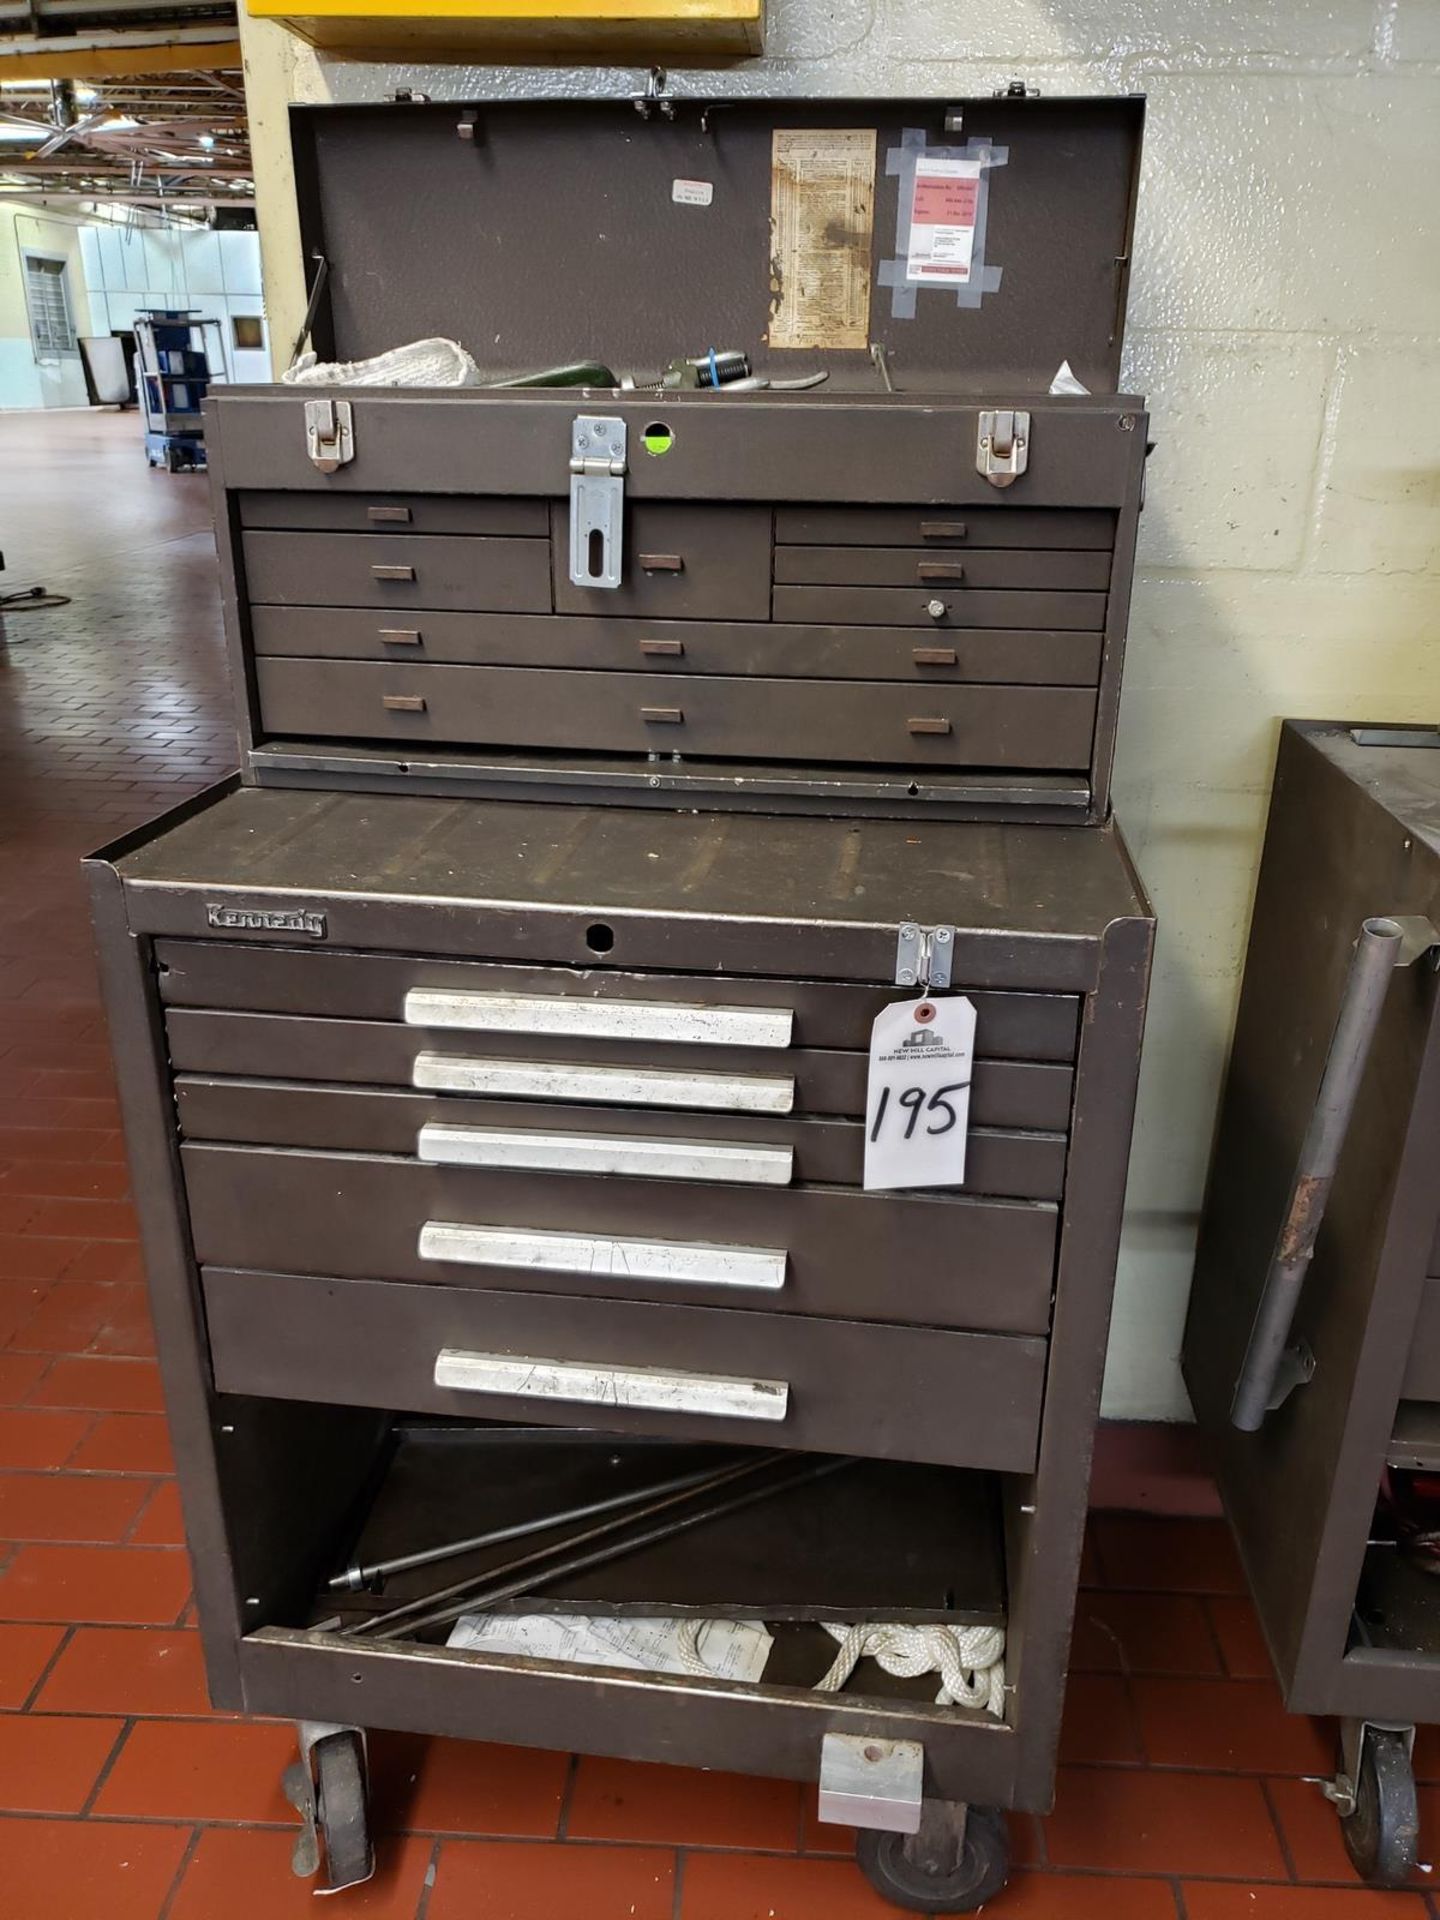 Kennedy Roll-A-Round Tool Chest, W/ Top Box & Contents | Rig Fee $35 or buyer to load